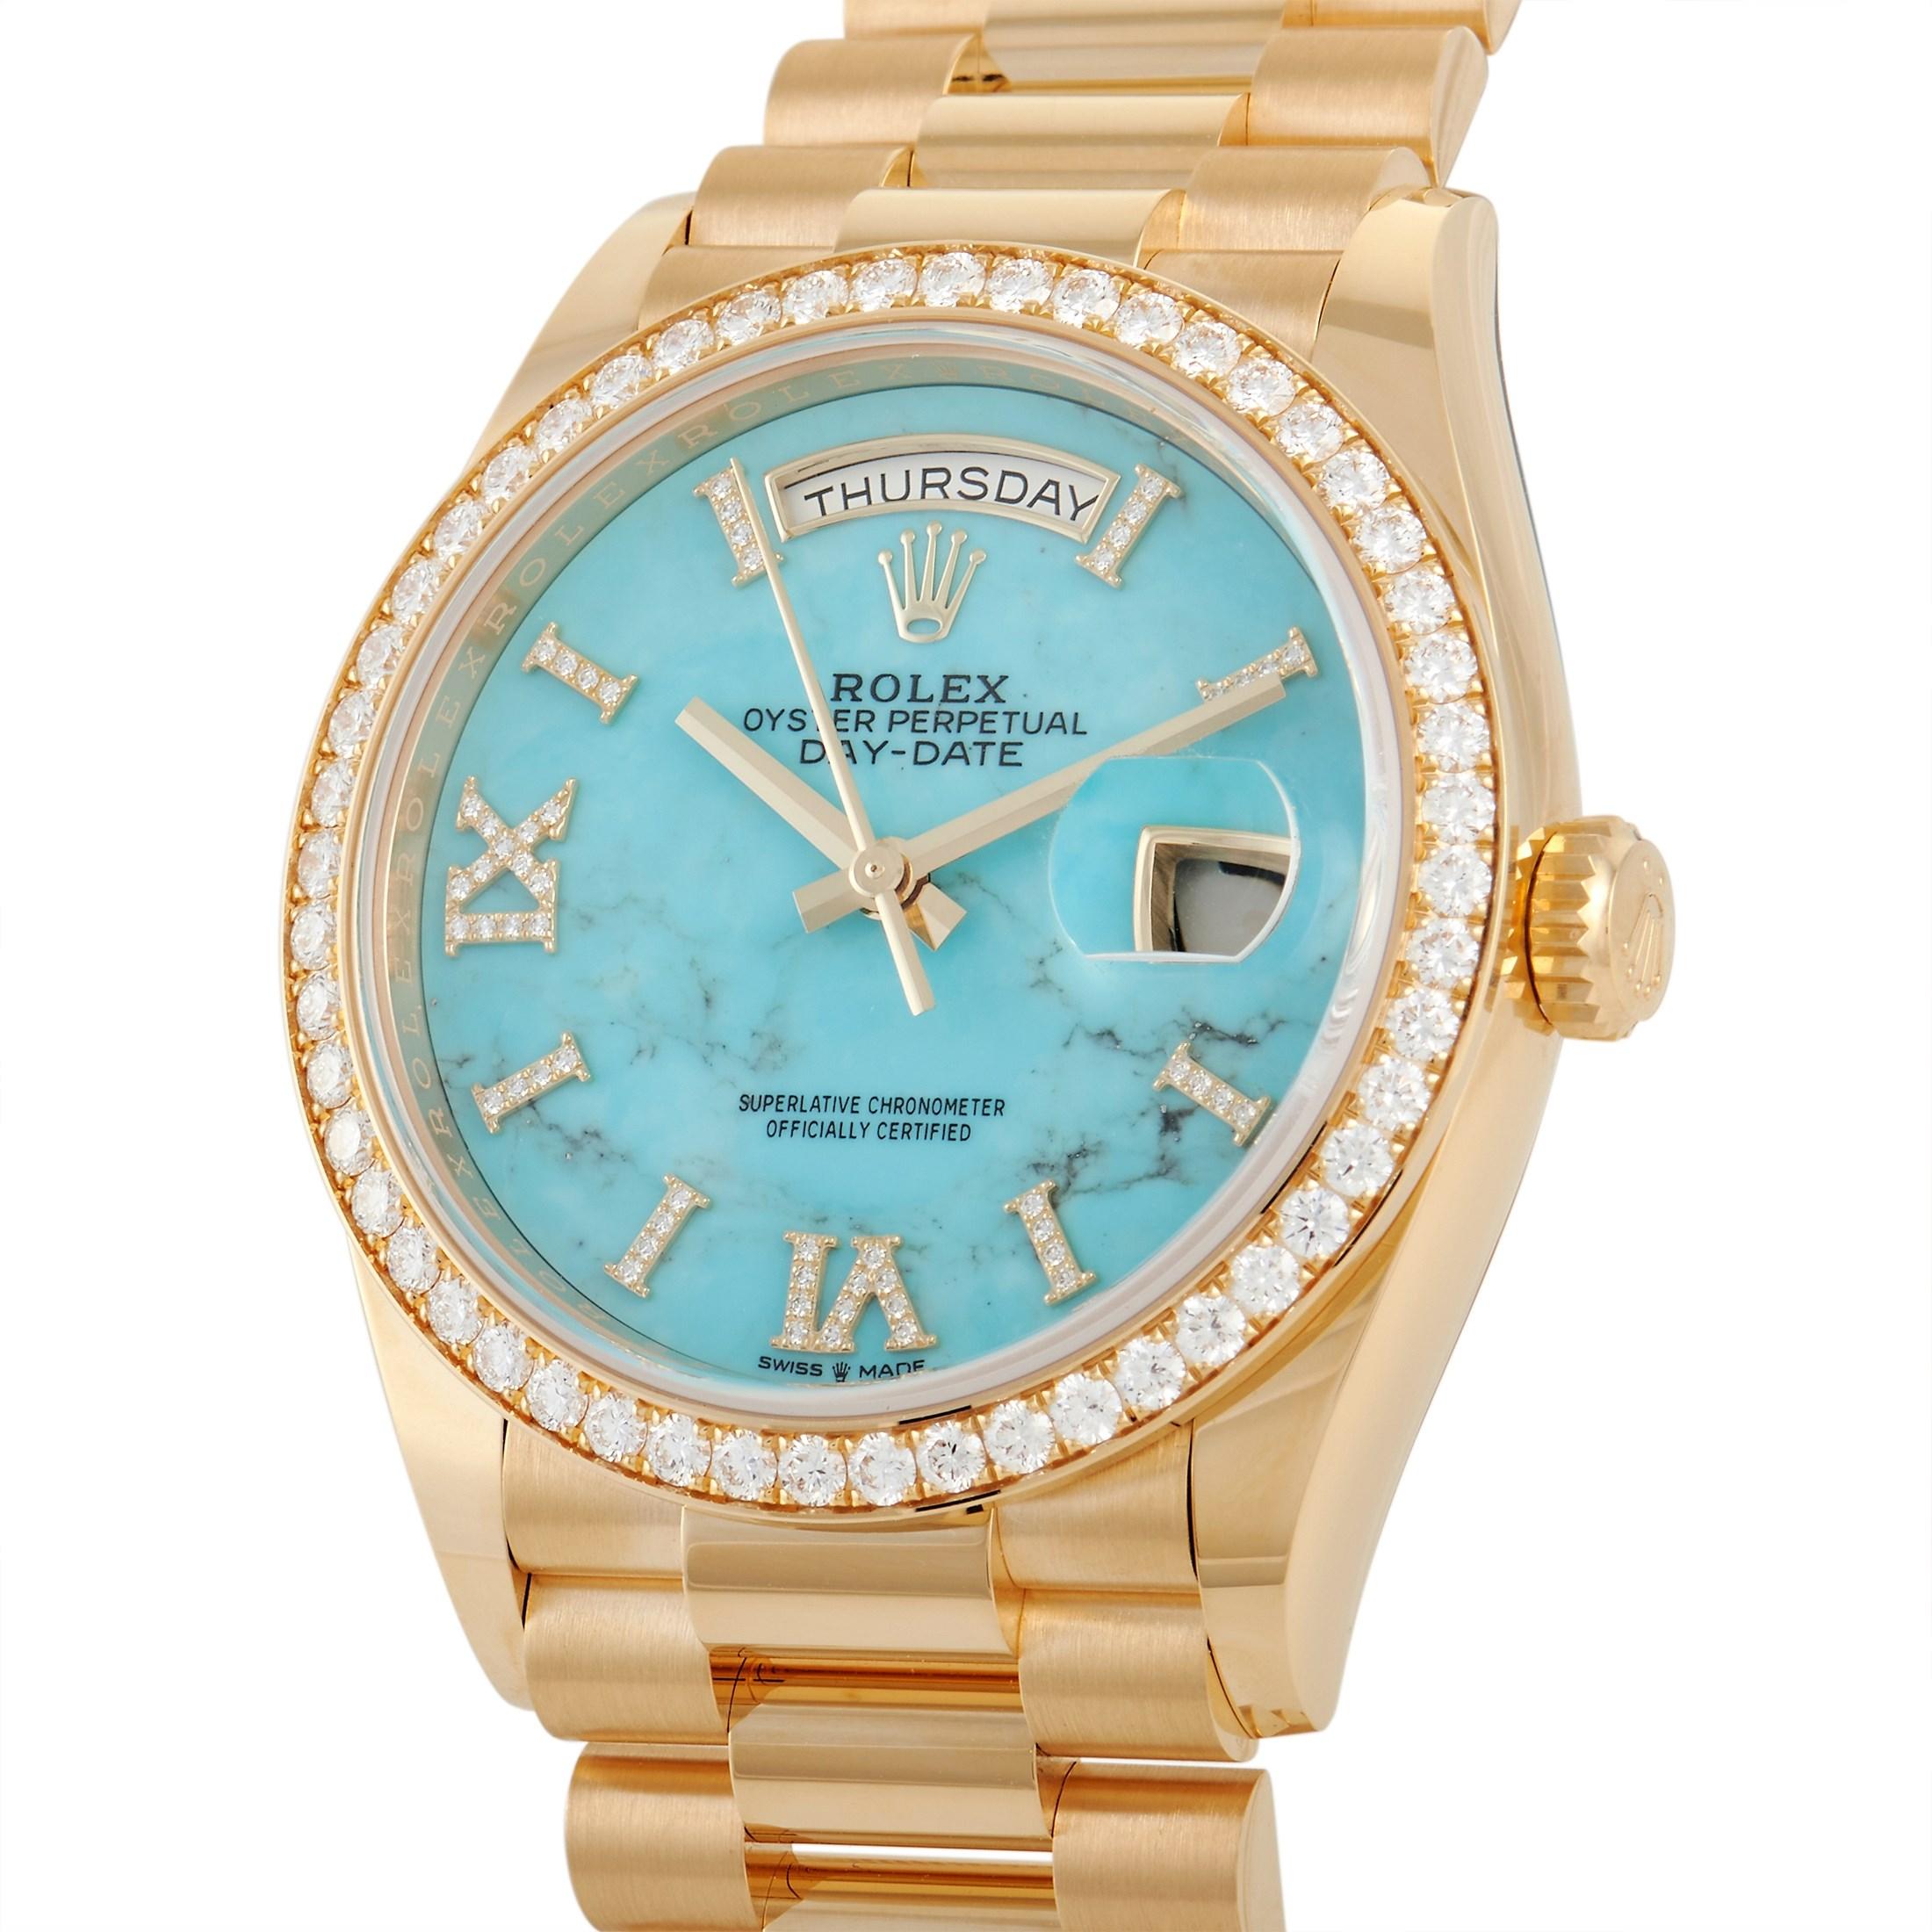 This Rolex Day-Date President Turquoise Dial Diamond Bezel Watch, reference number 118238, features an 18K yellow gold case measuring 36mm in diameter. The case has a diamond-set bezel and is presented on a matching yellow gold bracelet with a